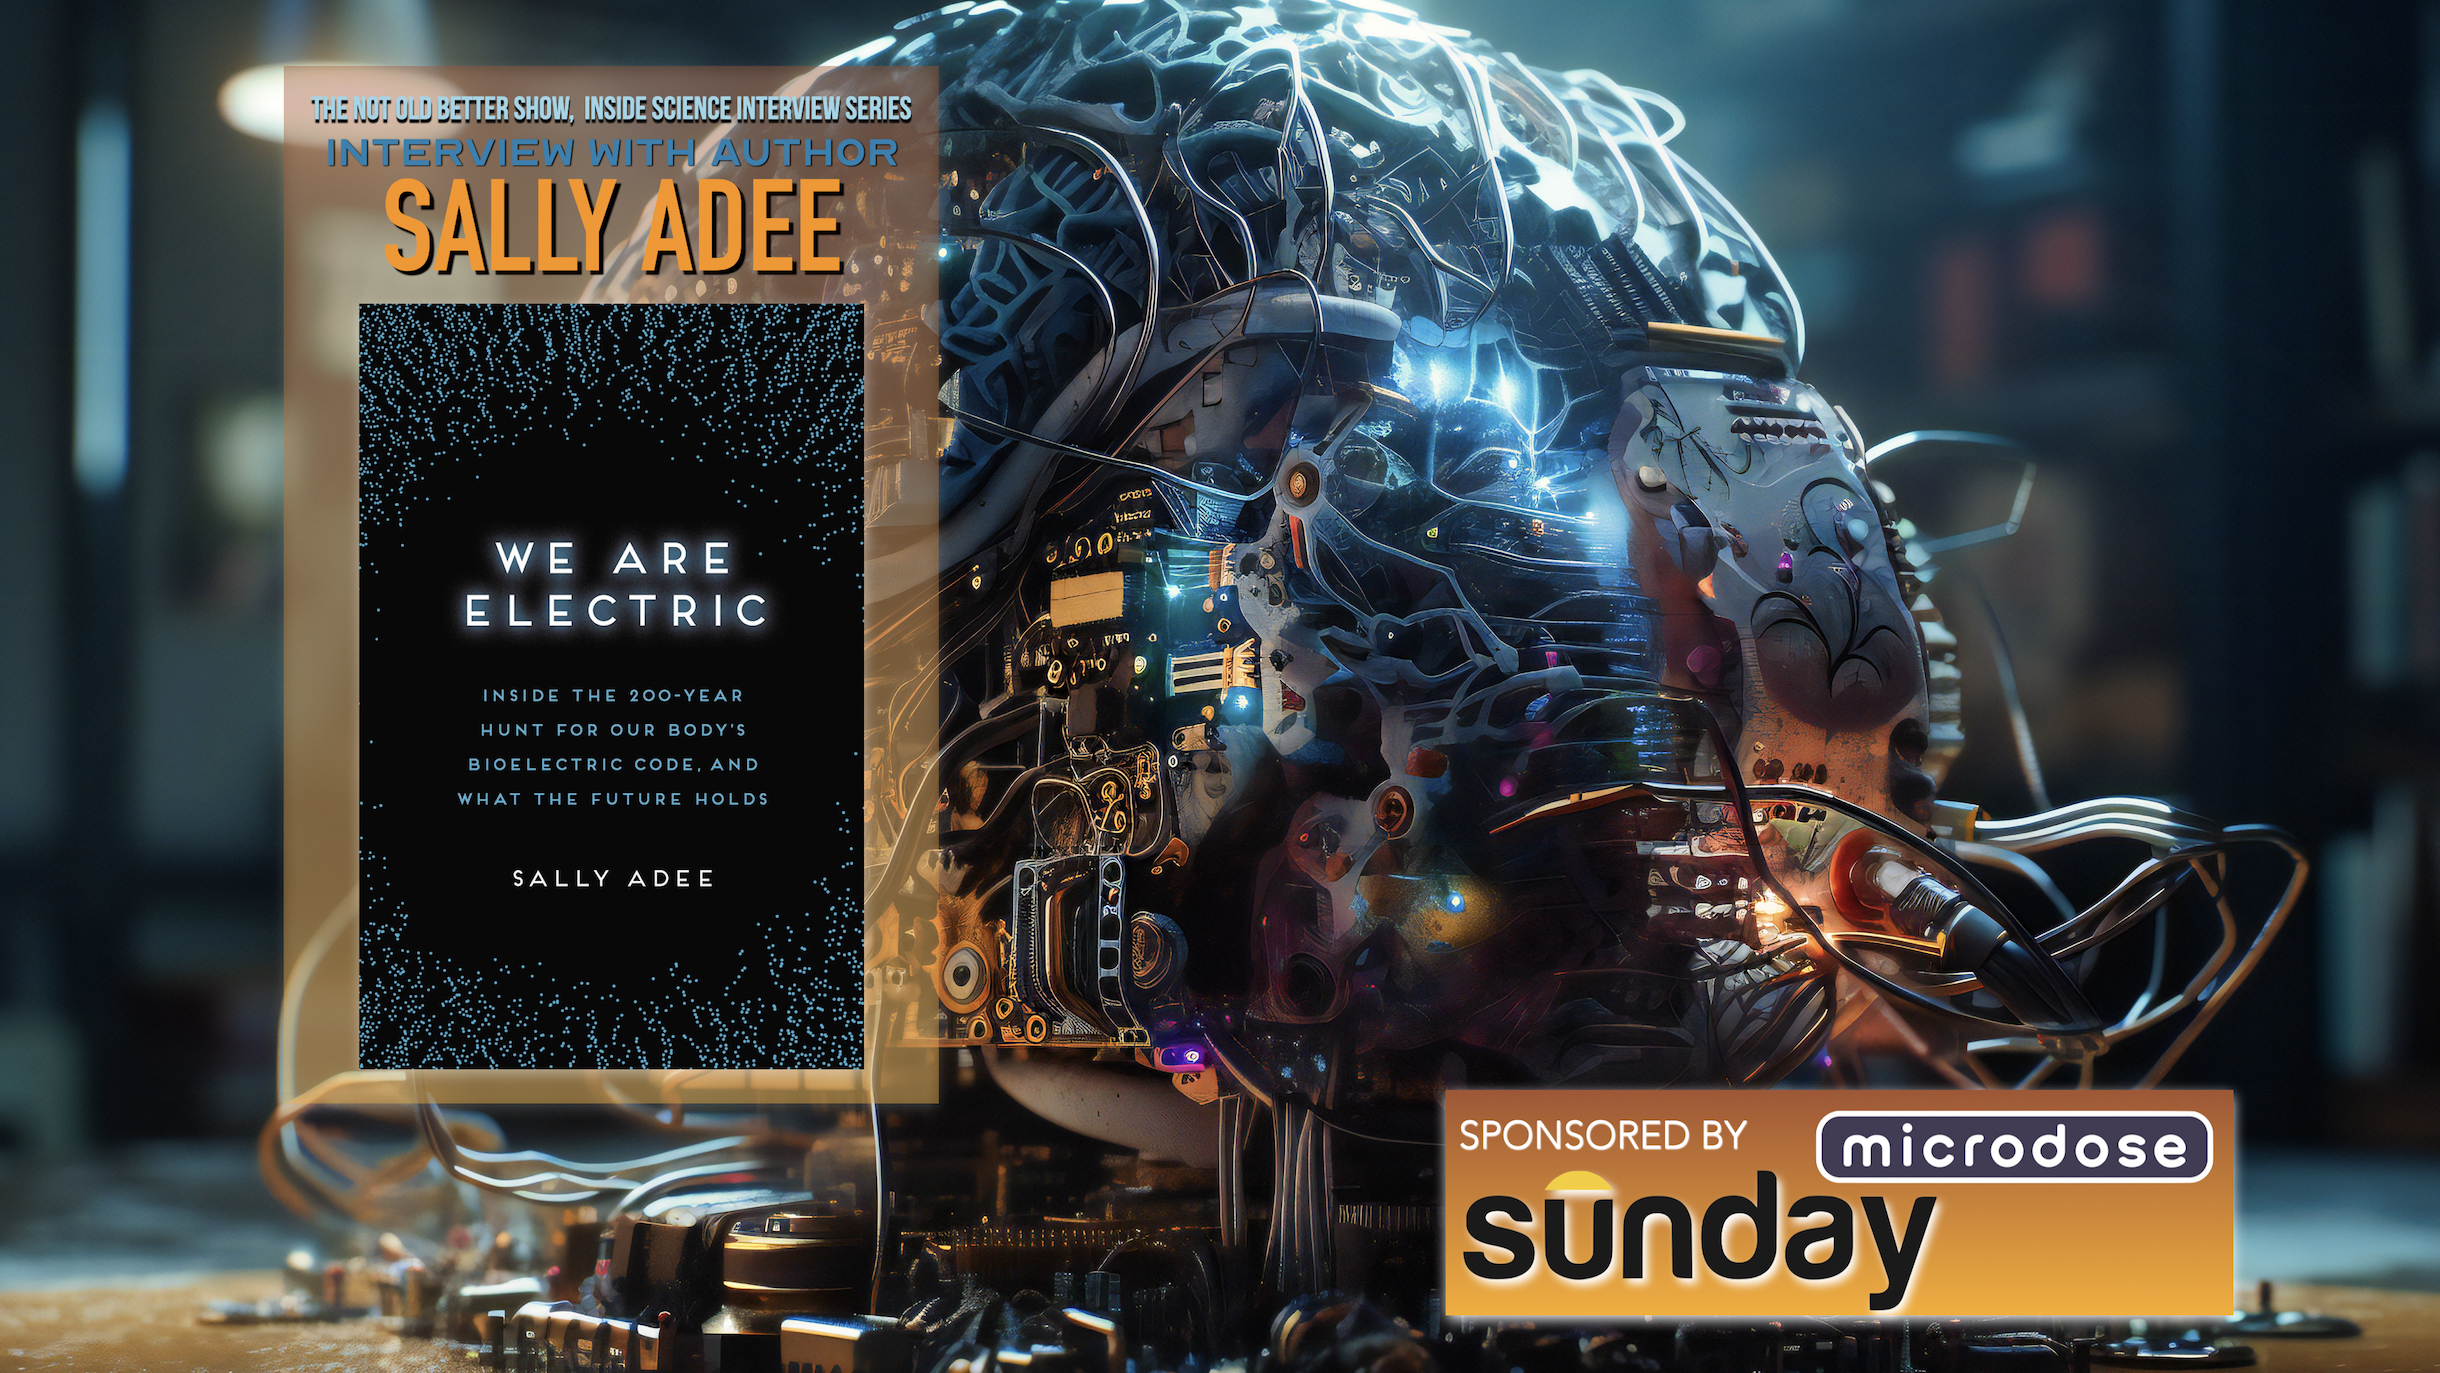 We Are Electric – Sally Adee